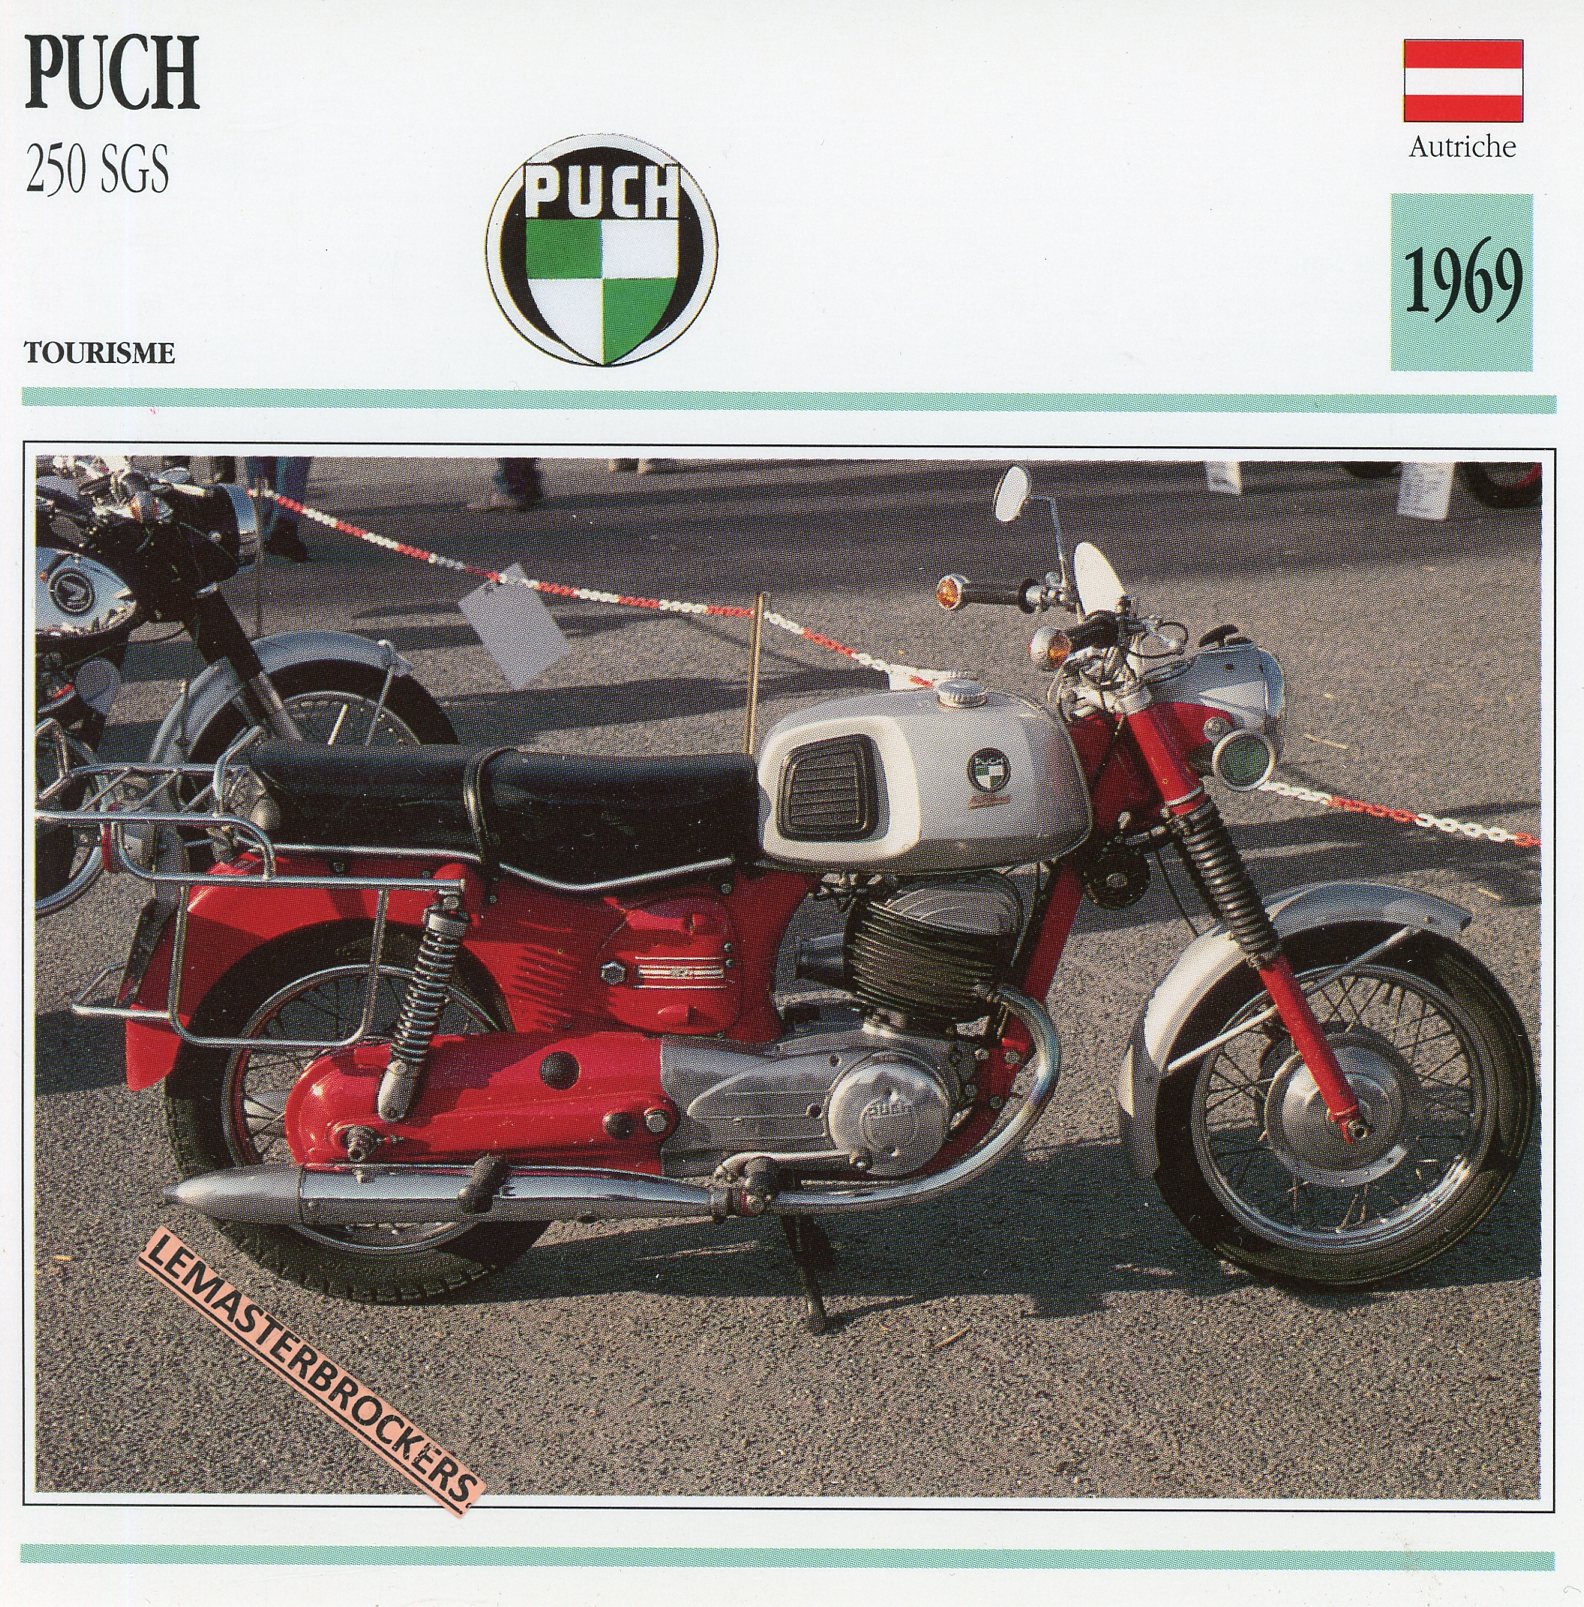 PUCH-250-SGS-1969-FICHE-MOTO-MOTORCYCLE-CARDS-ATLAS-LEMASTERBROCKERS